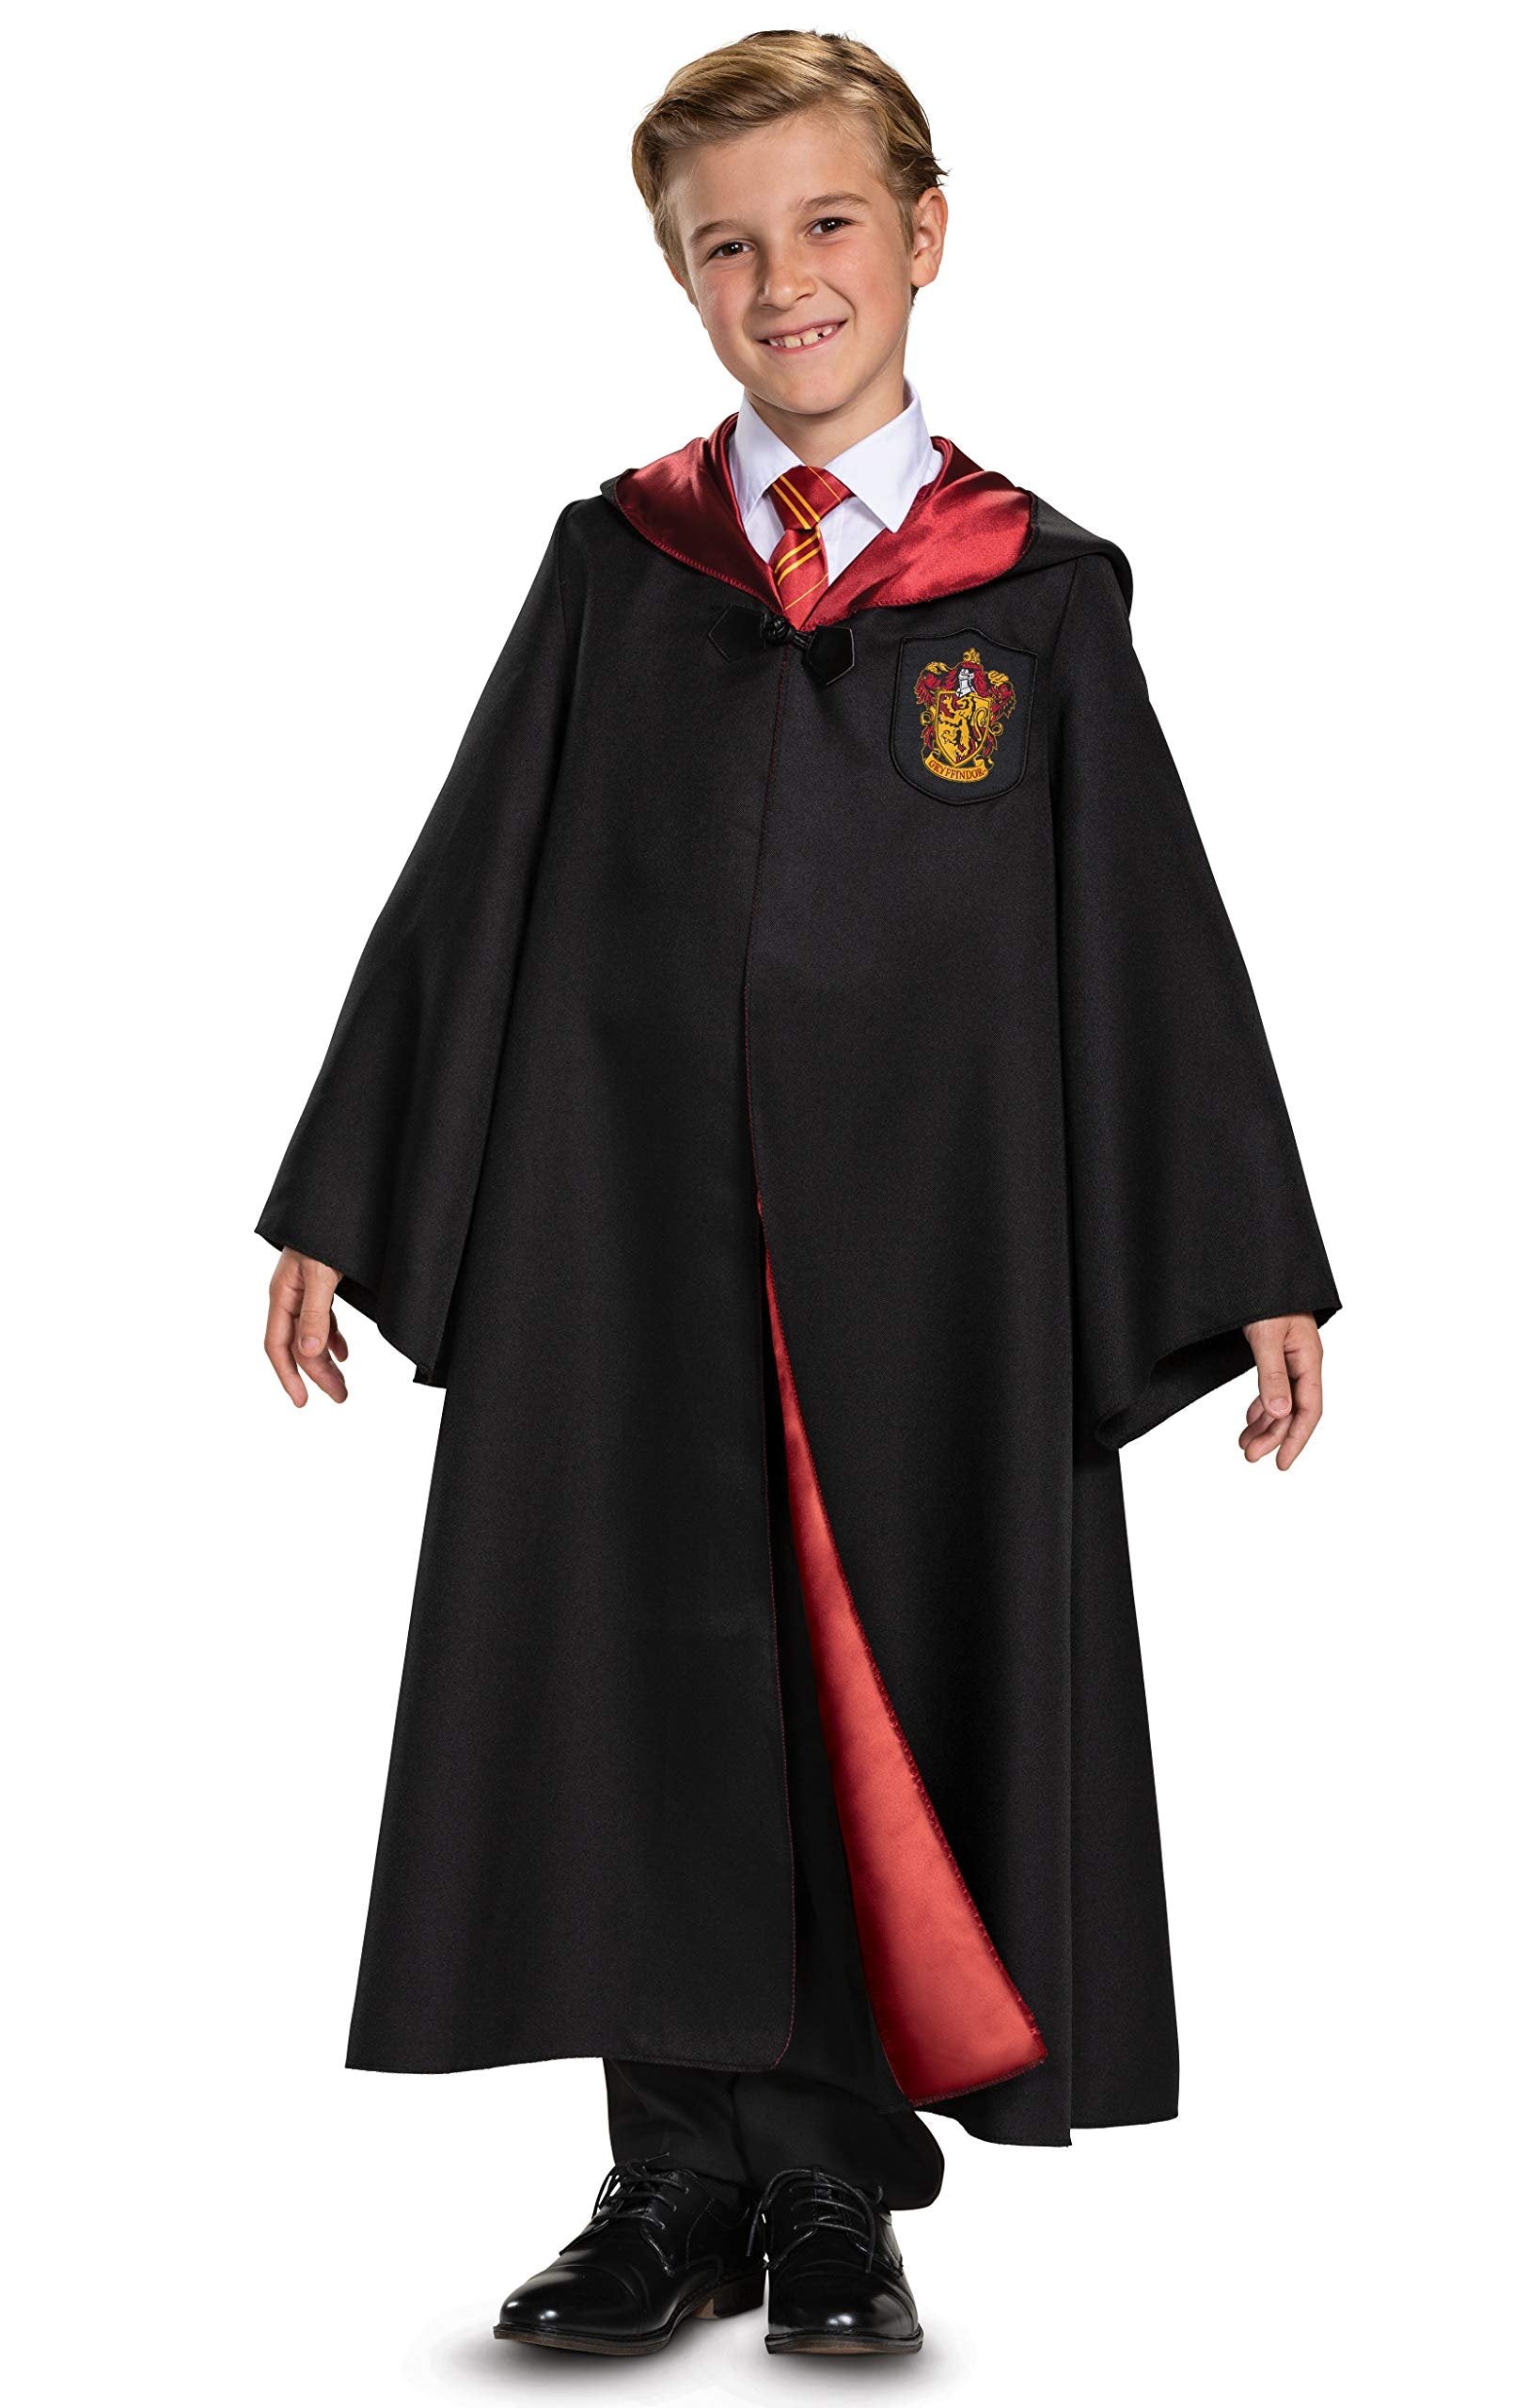 Disguise Harry Potter Gryffindor Robe, Official Hogwarts Wizarding World Costume Robe, Deluxe Kids Dress Up Accessory, Child Size Small (4-6), Black & Red